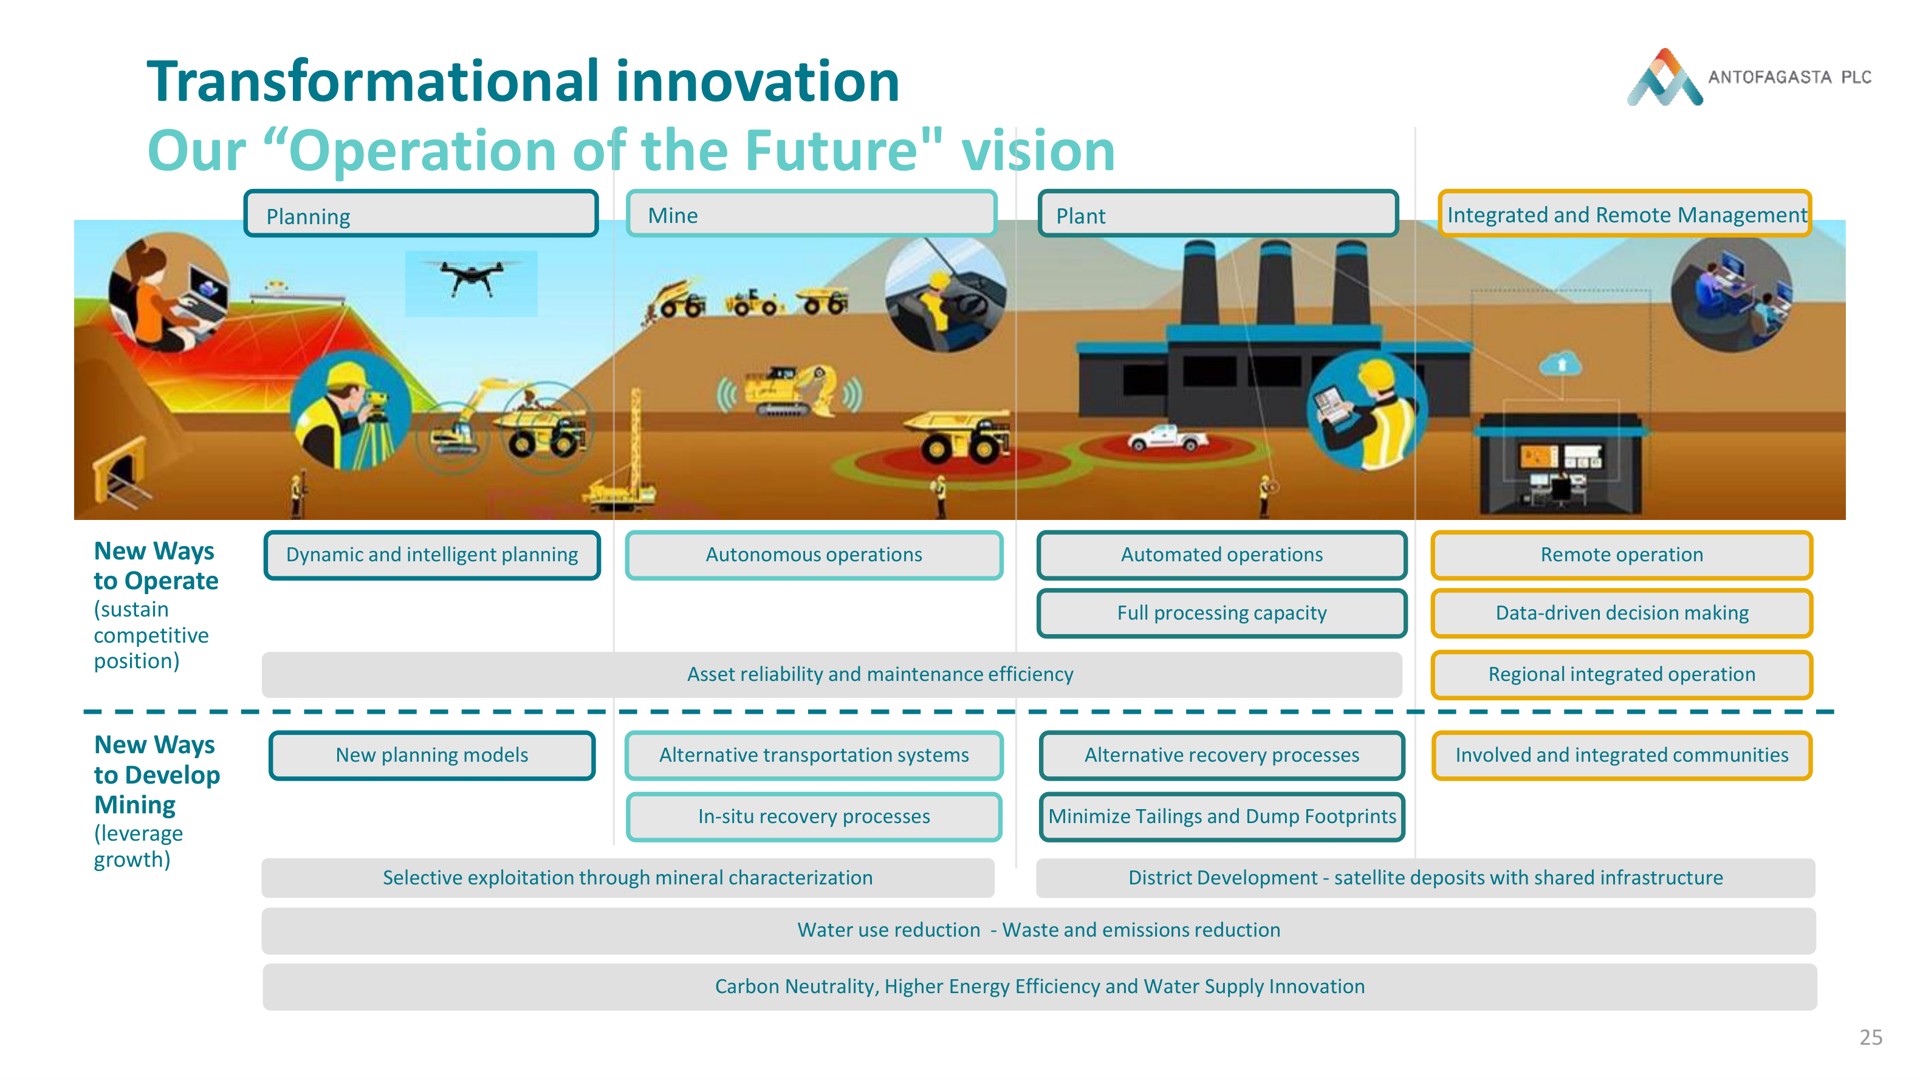 innovation our operation of the future vision | Antofagasta